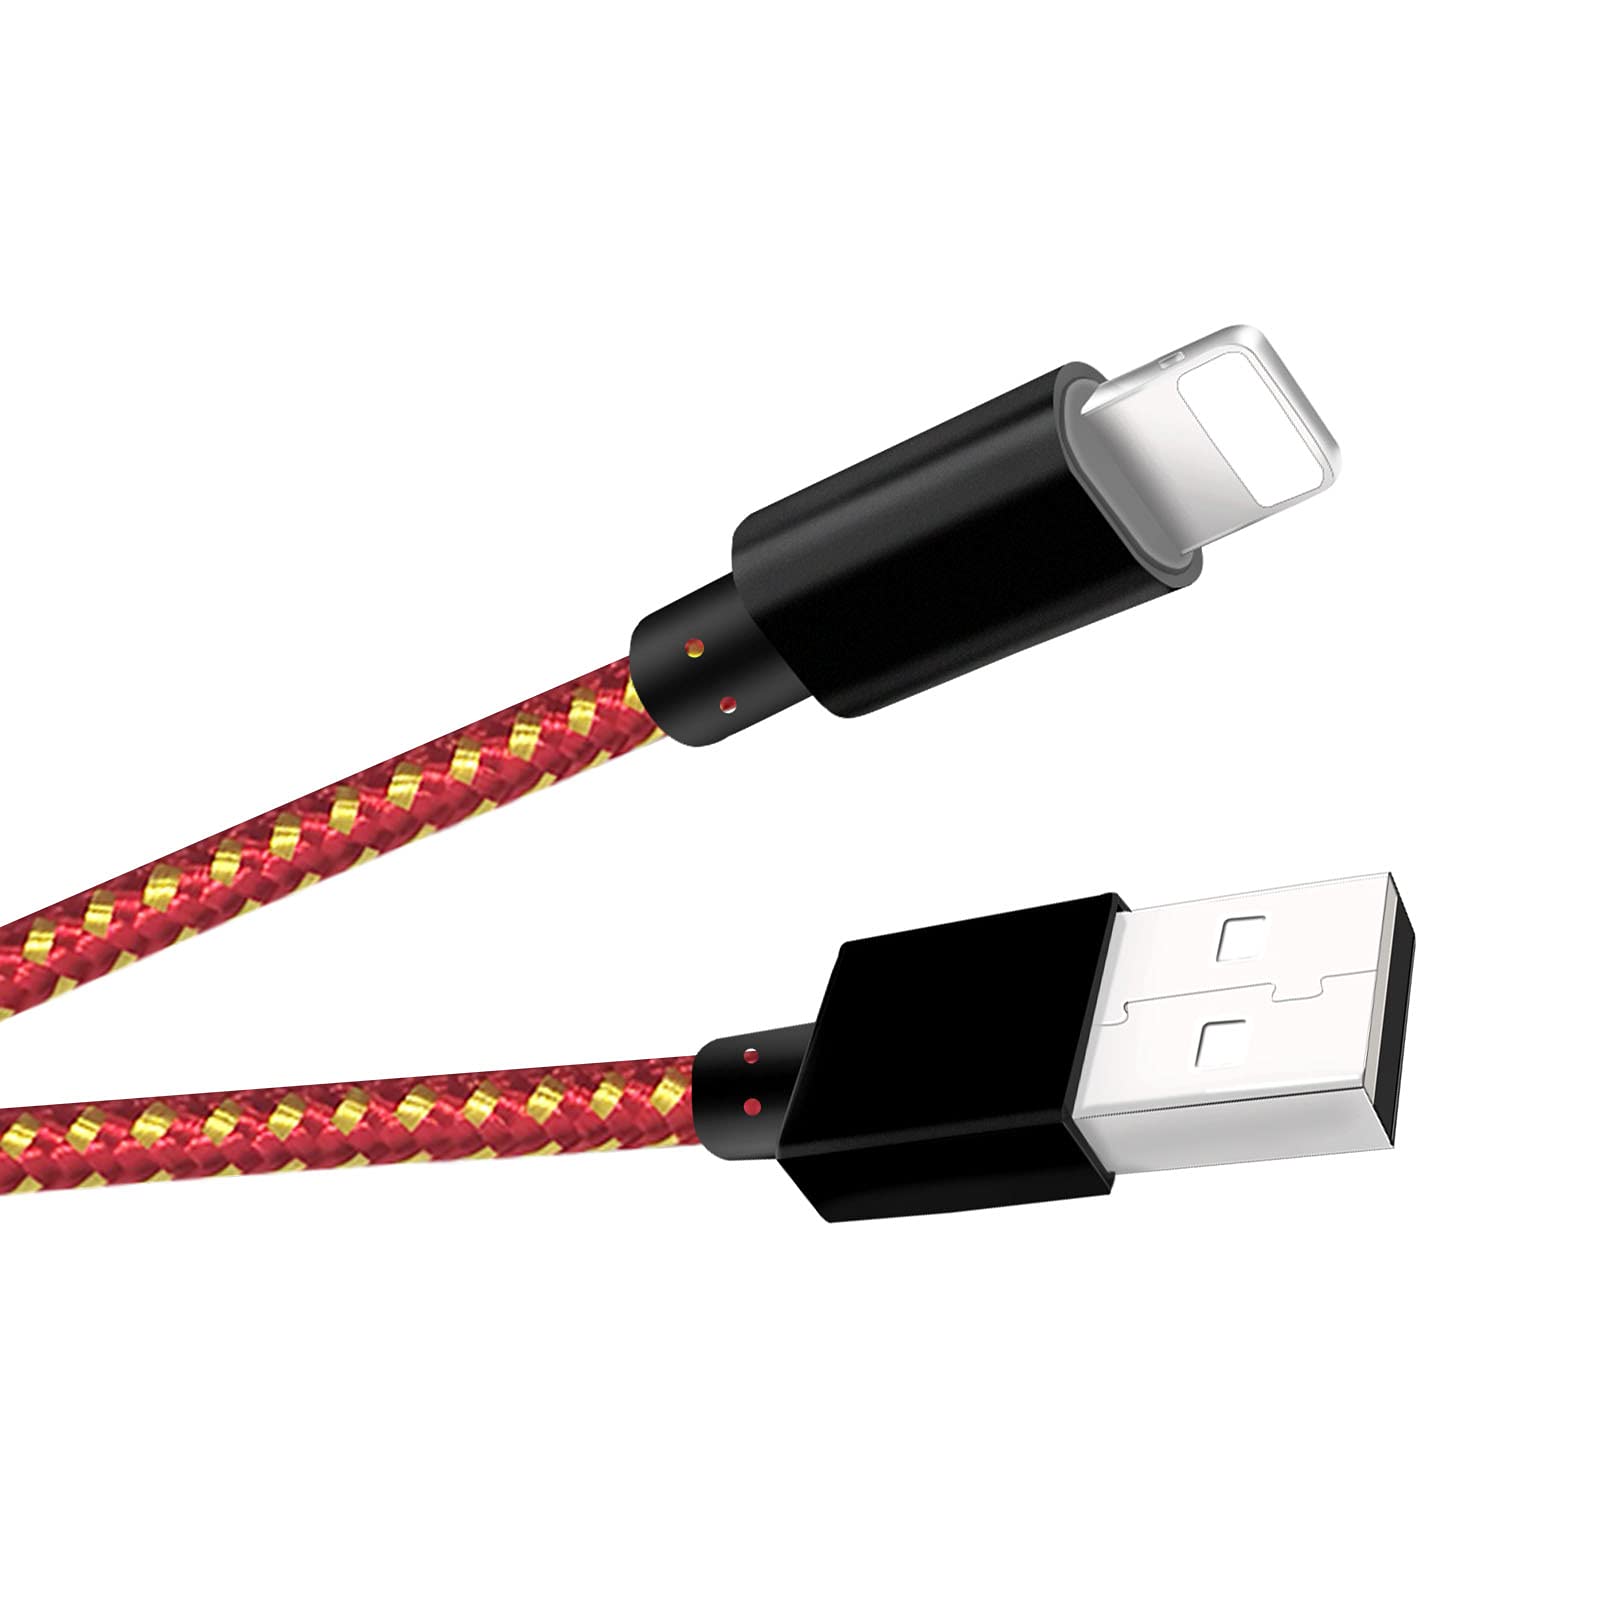 A USB cable with a red X over it.